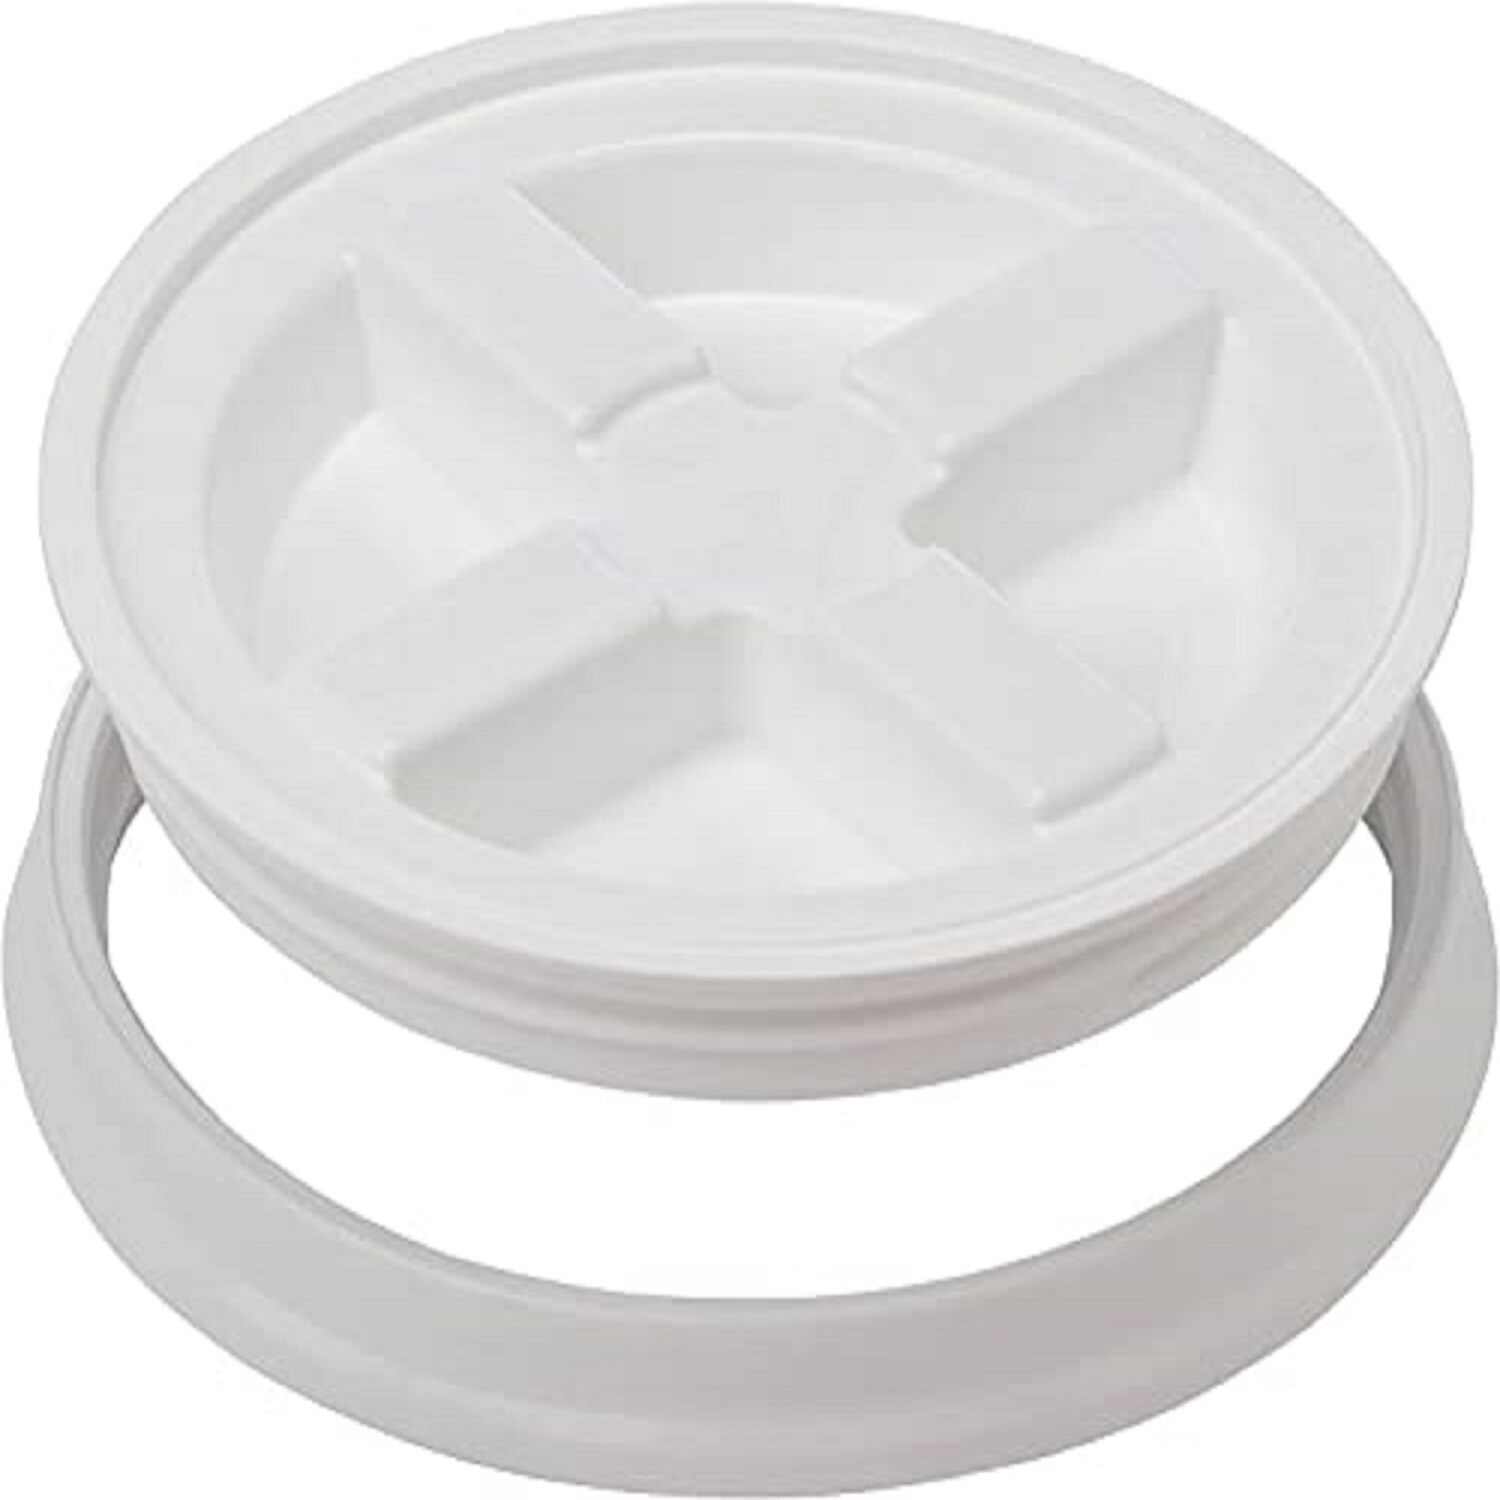 6 Gallon Pail Kit with Gamma Seal Lids, 10-pack